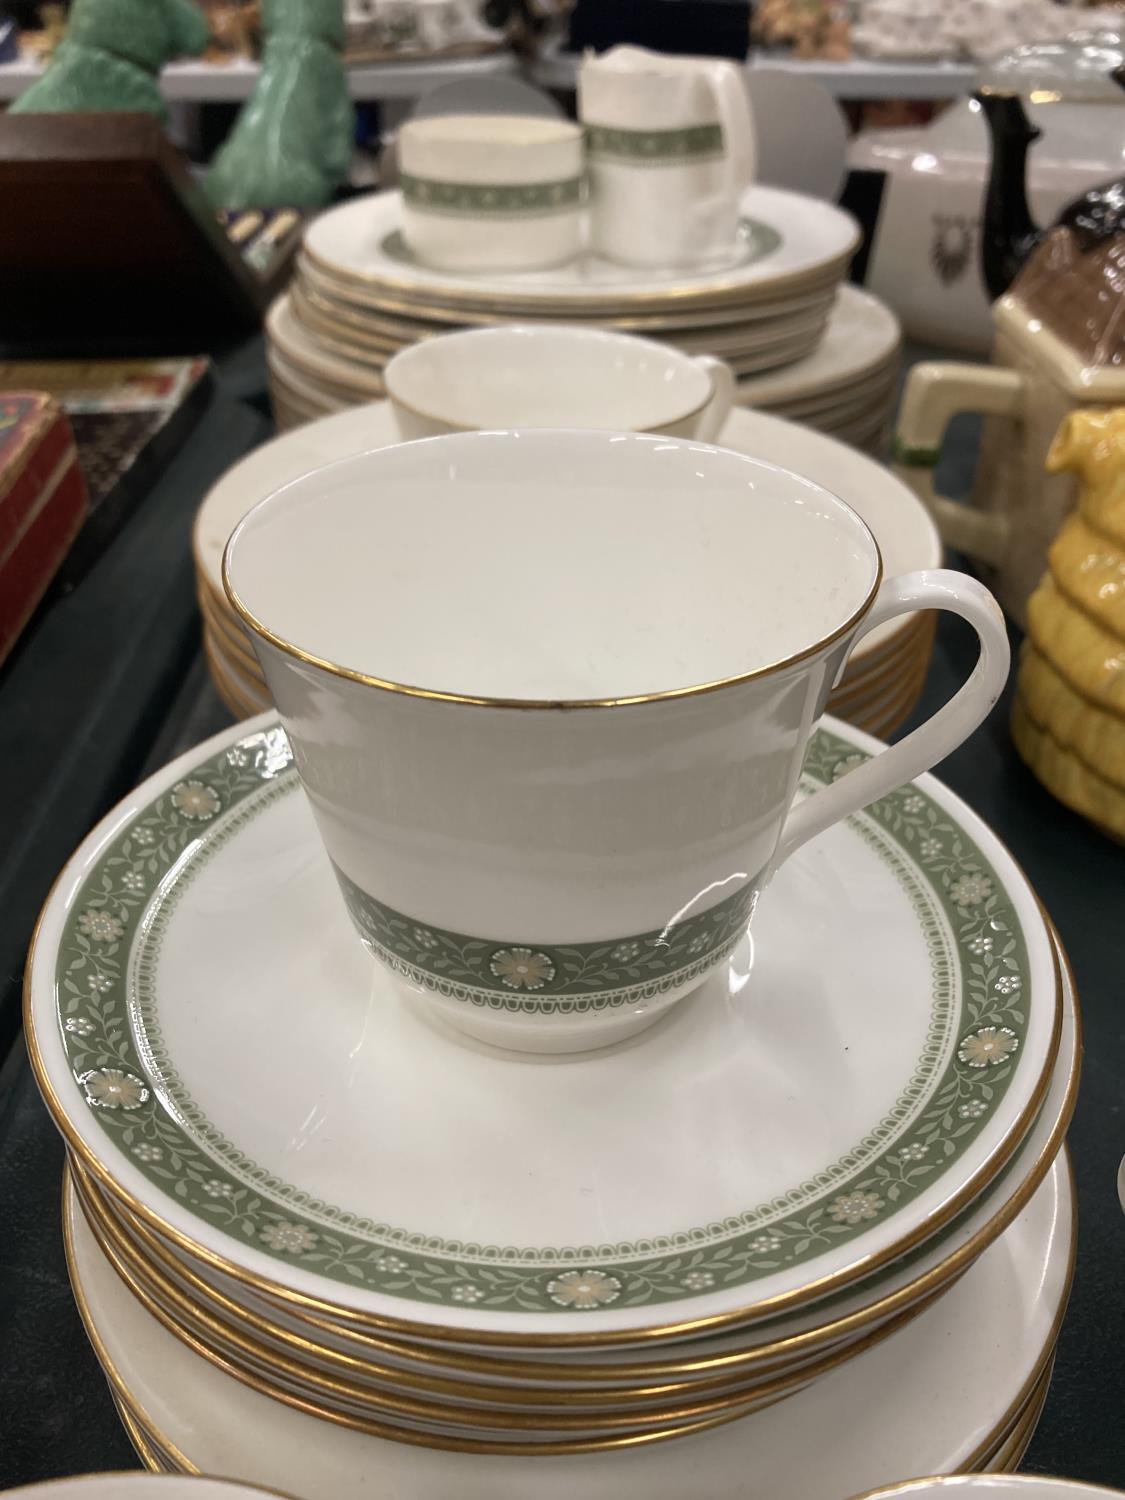 A ROYAL DOULTON 'RONDELAY' PART DINNER SERVICE TO INCLUDE VARIOUS SIZED PLATES, BOWLS, CUPS AND - Image 2 of 5